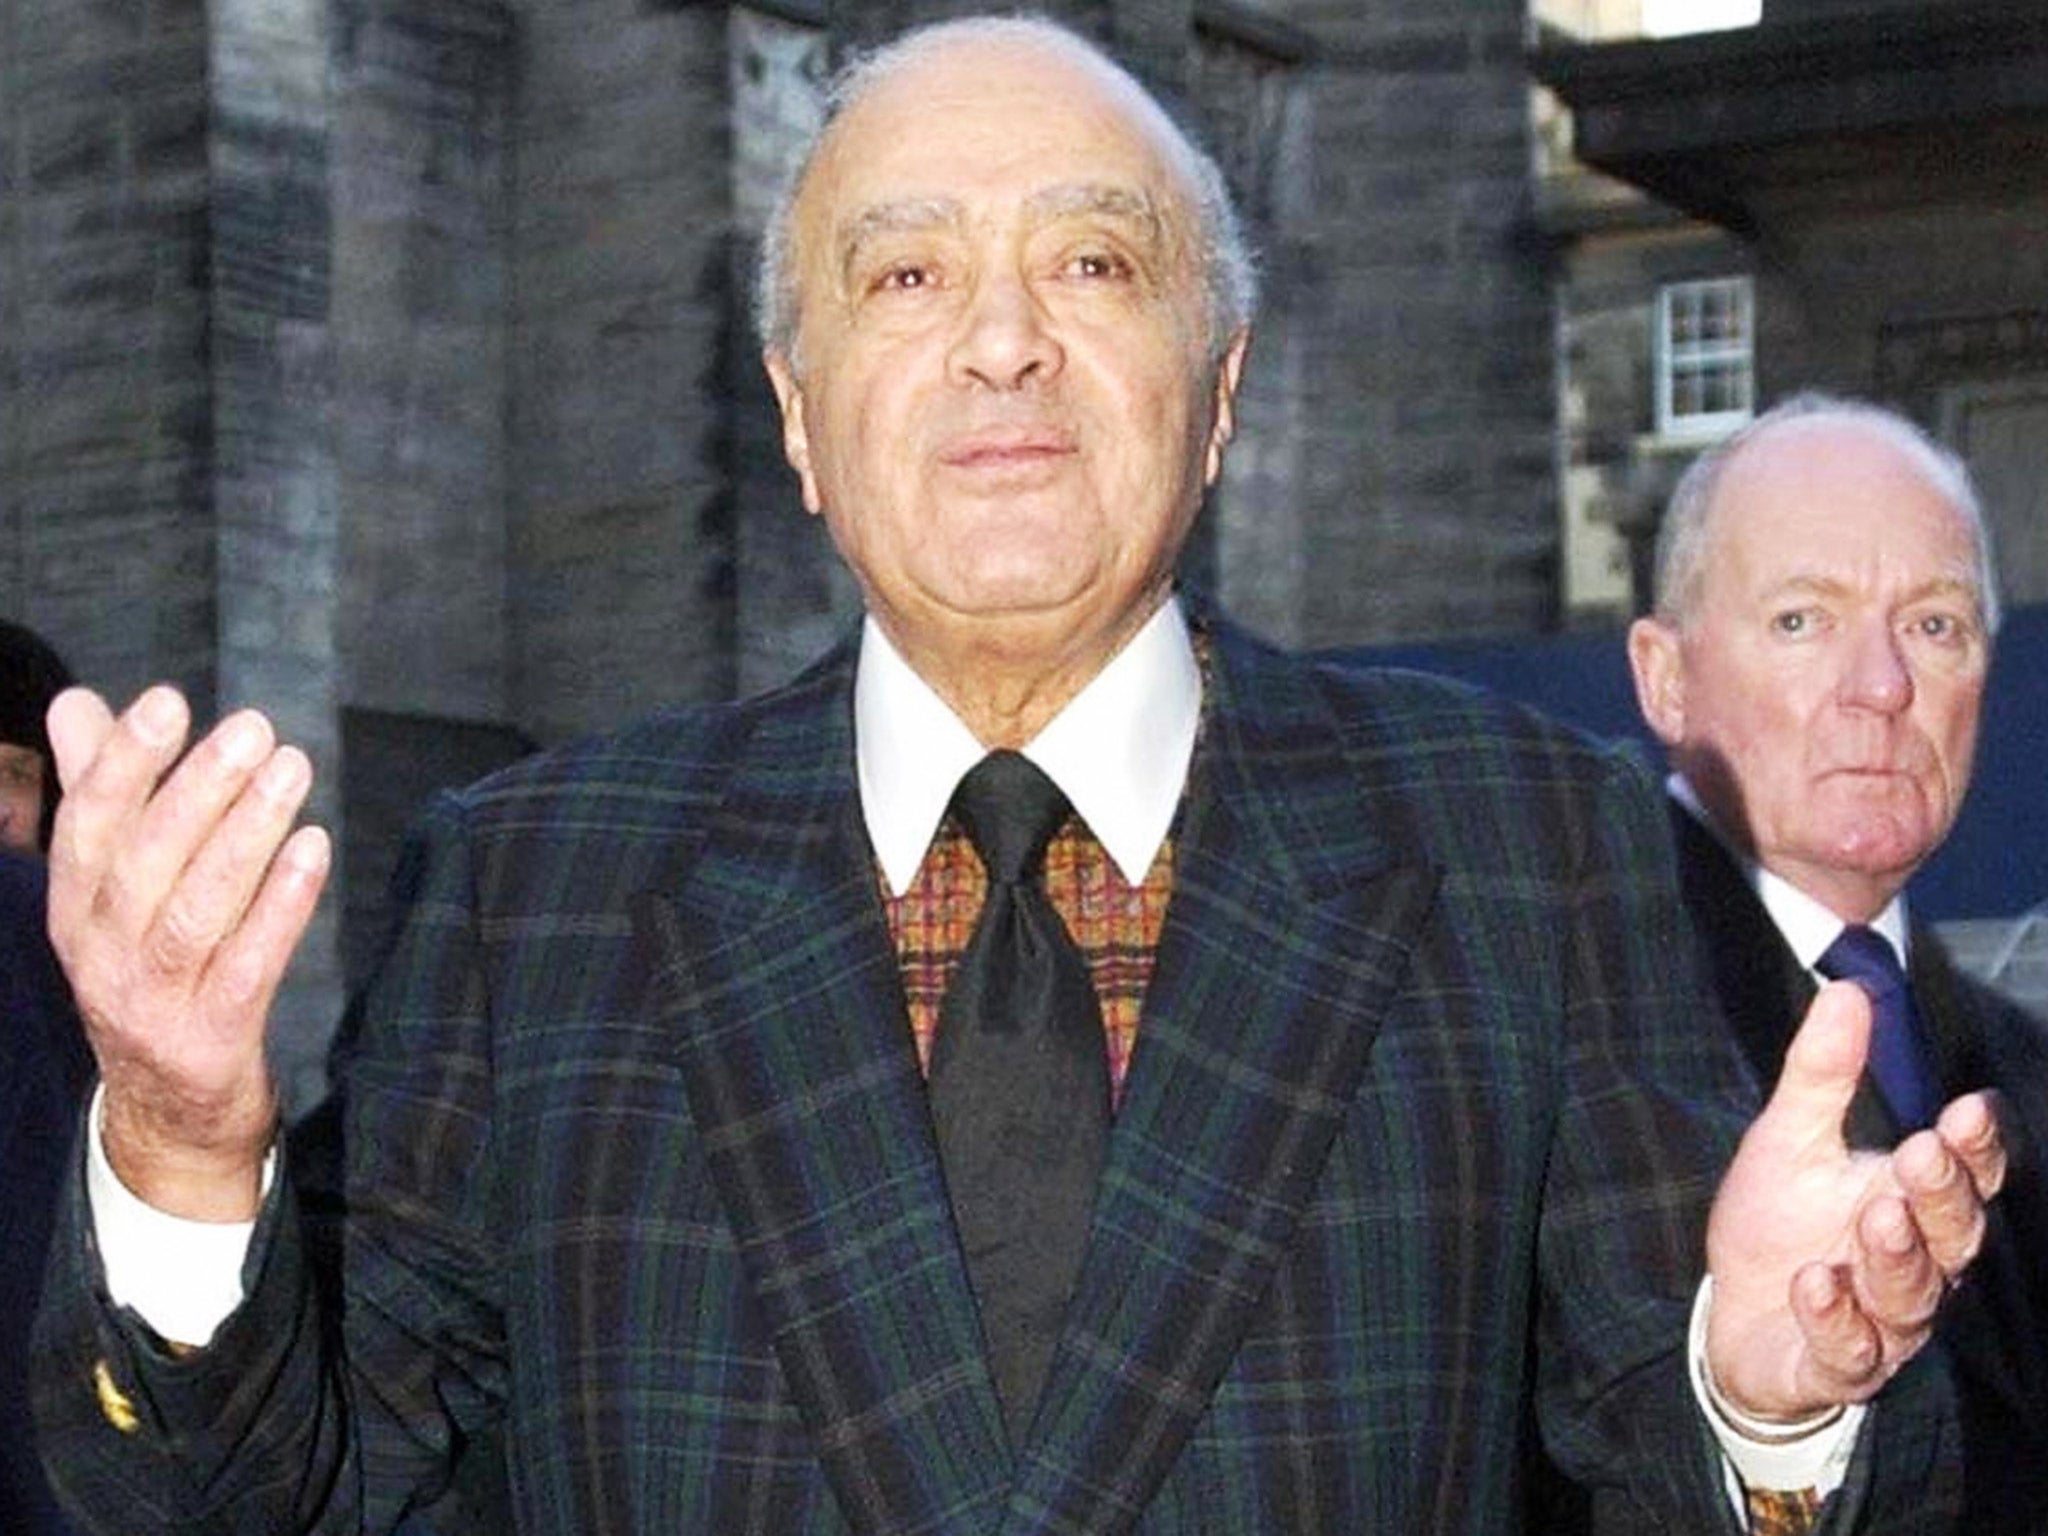 Former Harrods owner Mohammed Fayed now resides in Scotland